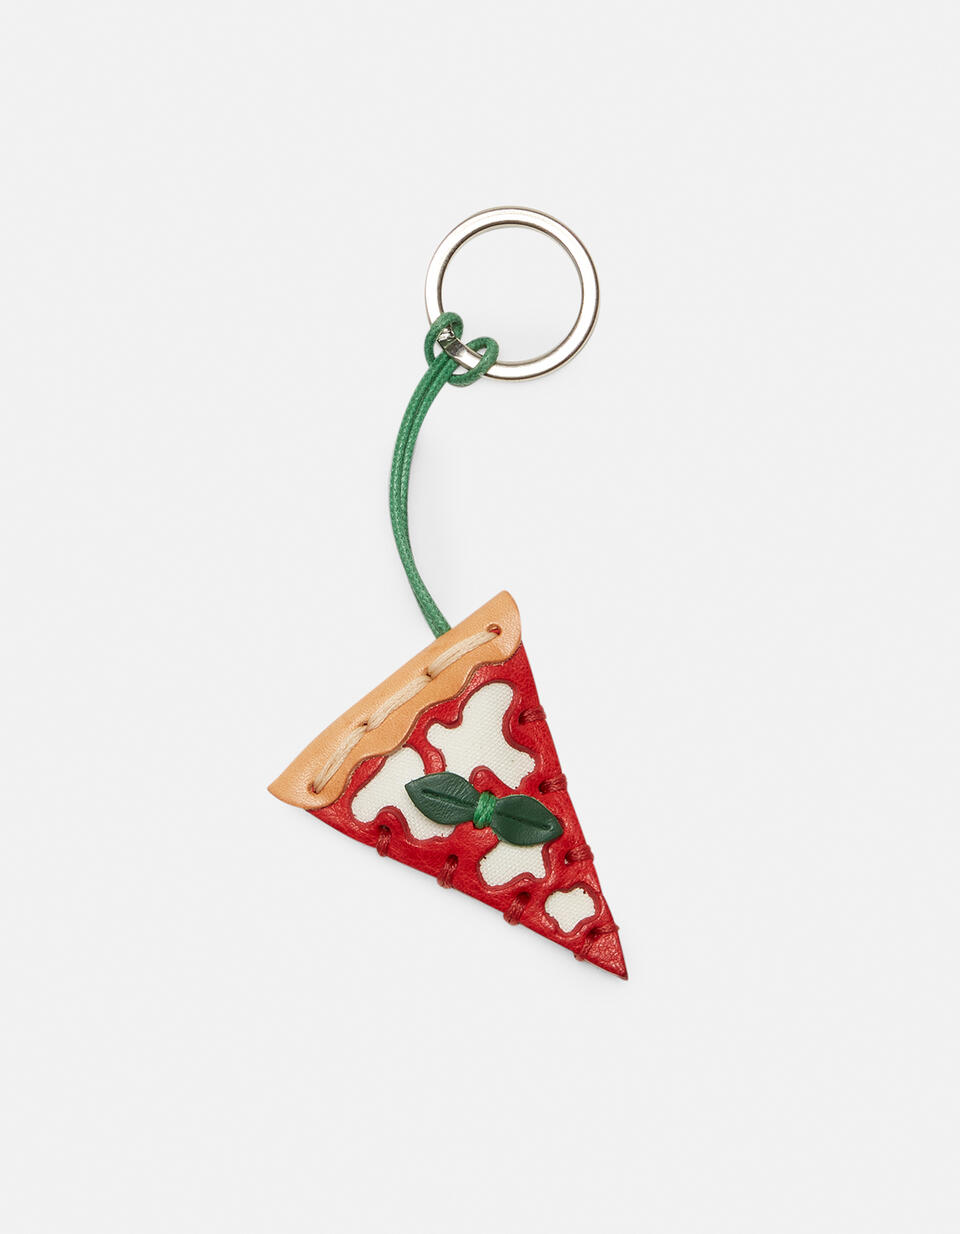 Pizza leather keyring - Key holders - Women's Accessories | Accessories  - Key holders - Women's Accessories | AccessoriesCuoieria Fiorentina